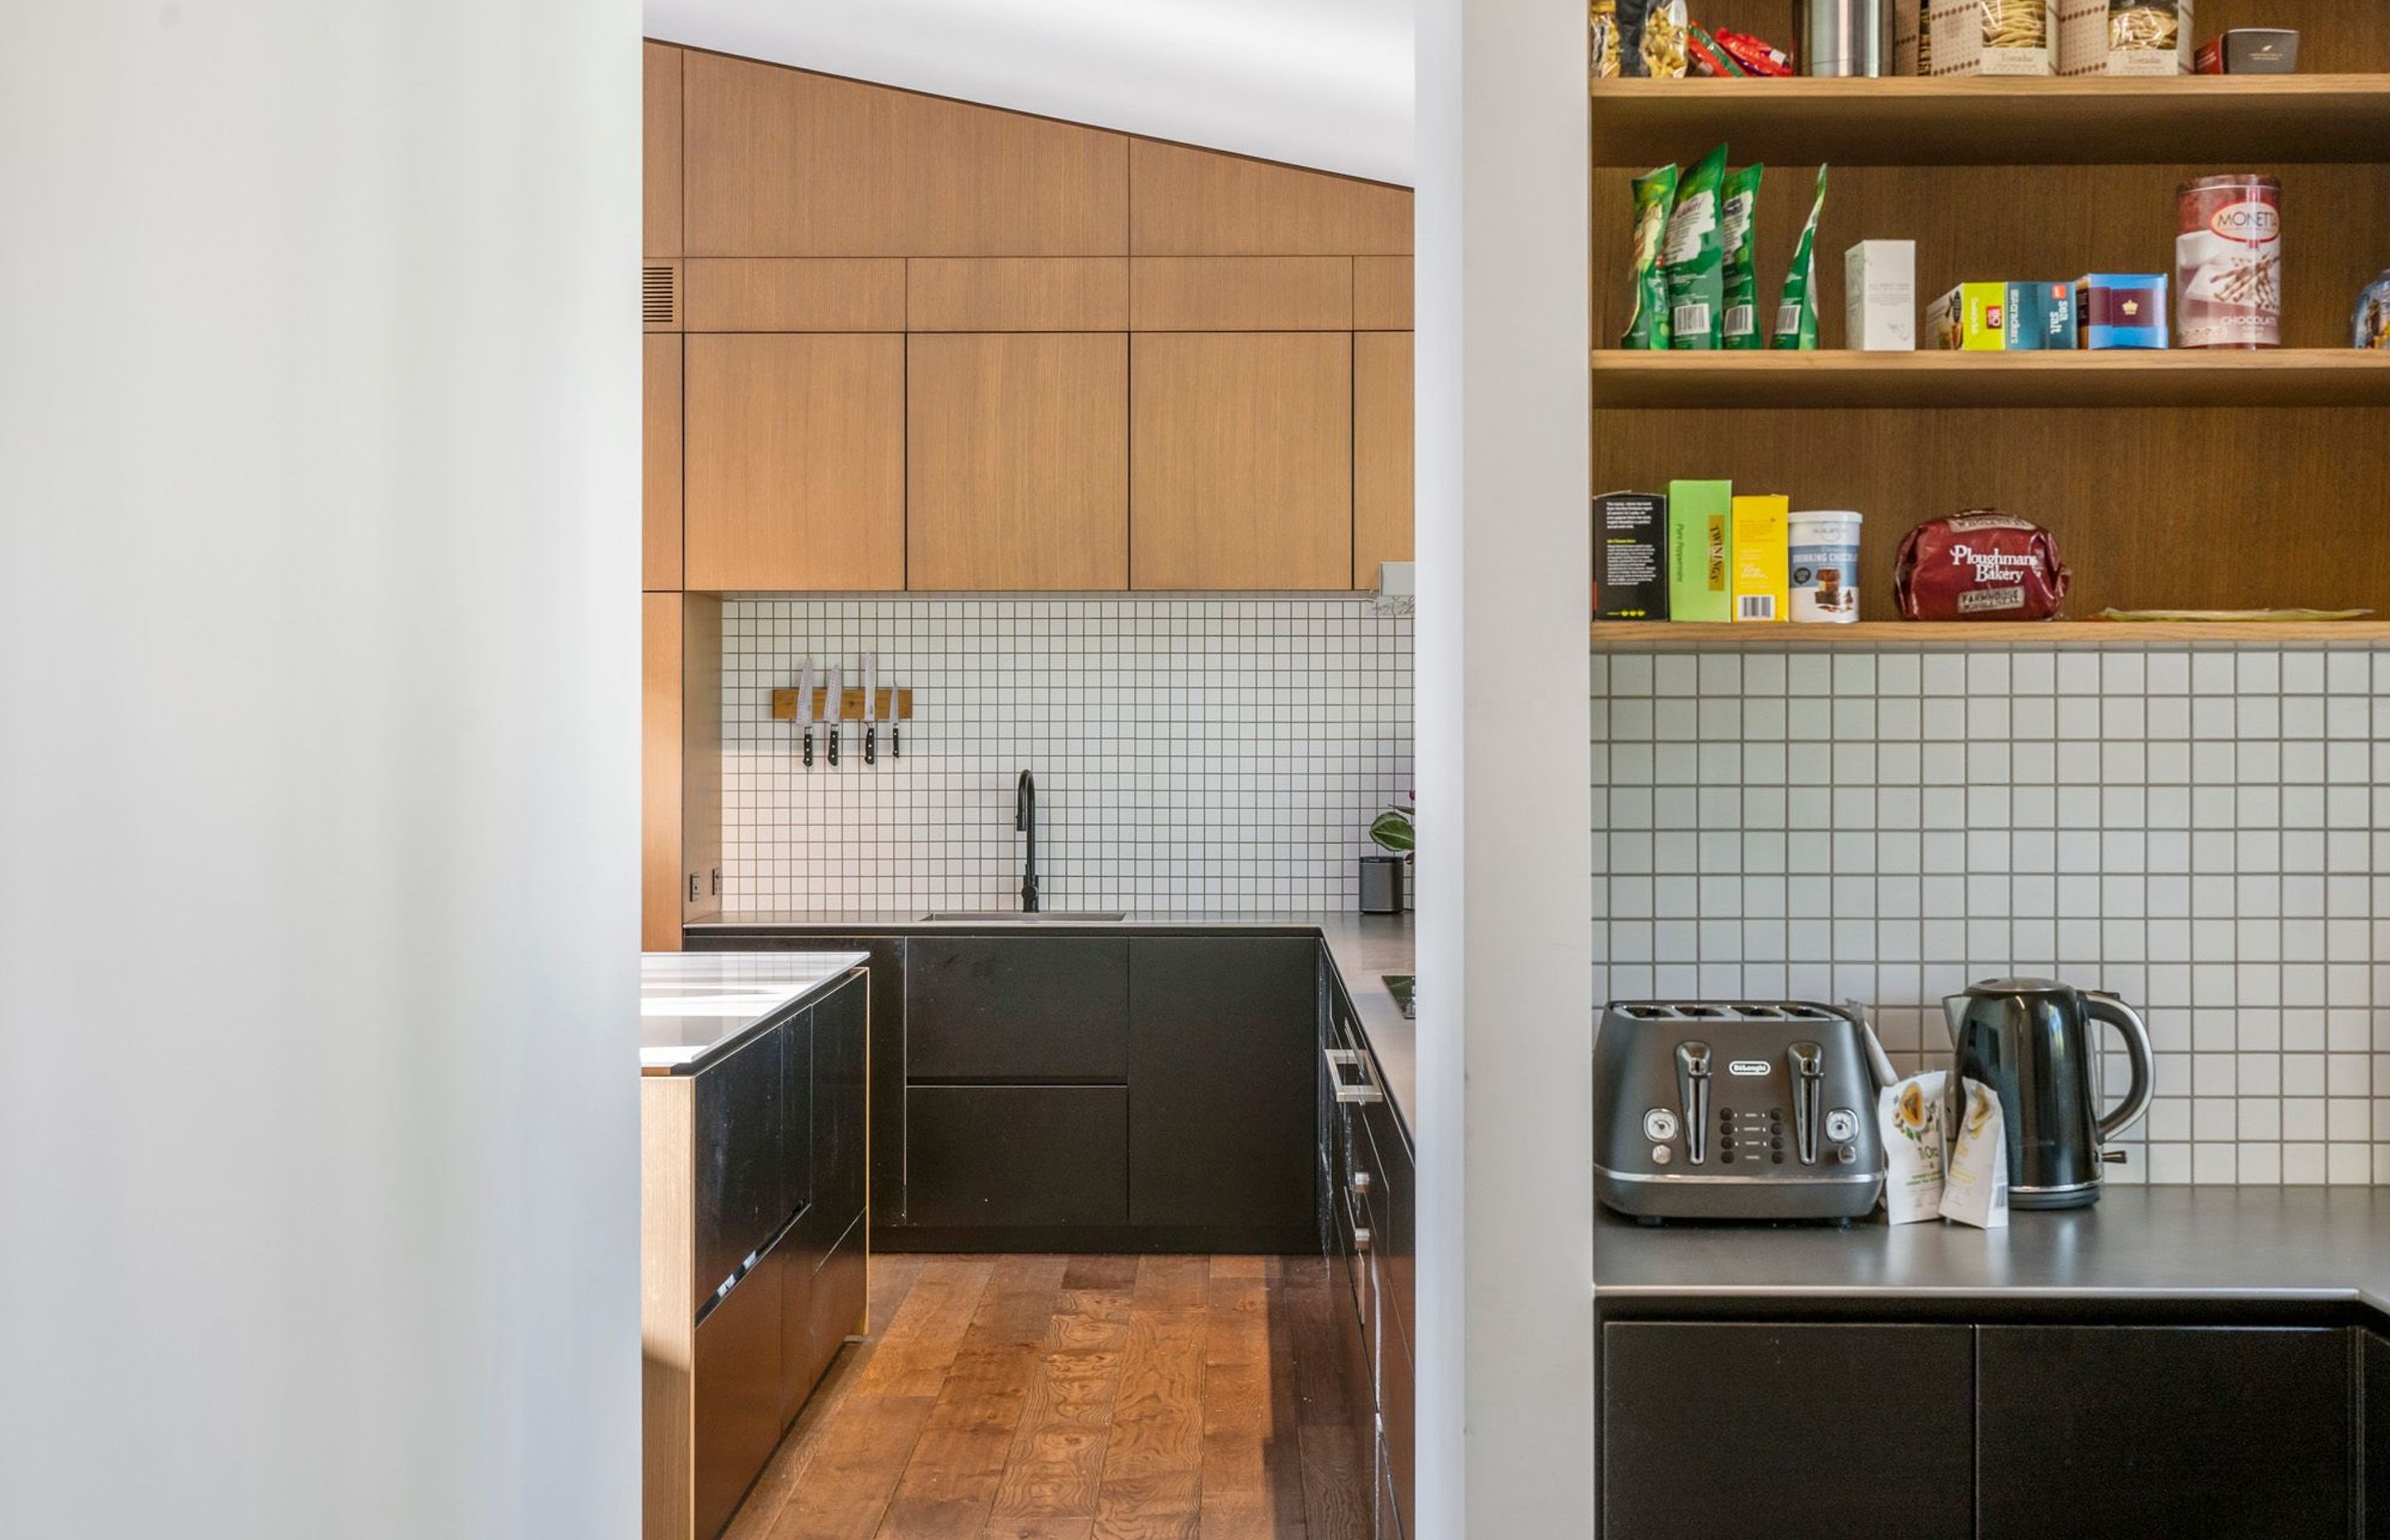 The adjacent scullery is hidden from the main kitchen and living area but is only a few paces away. White tiling with black grout and satin-finished steel worktops contrast the black and timber cabinetry.